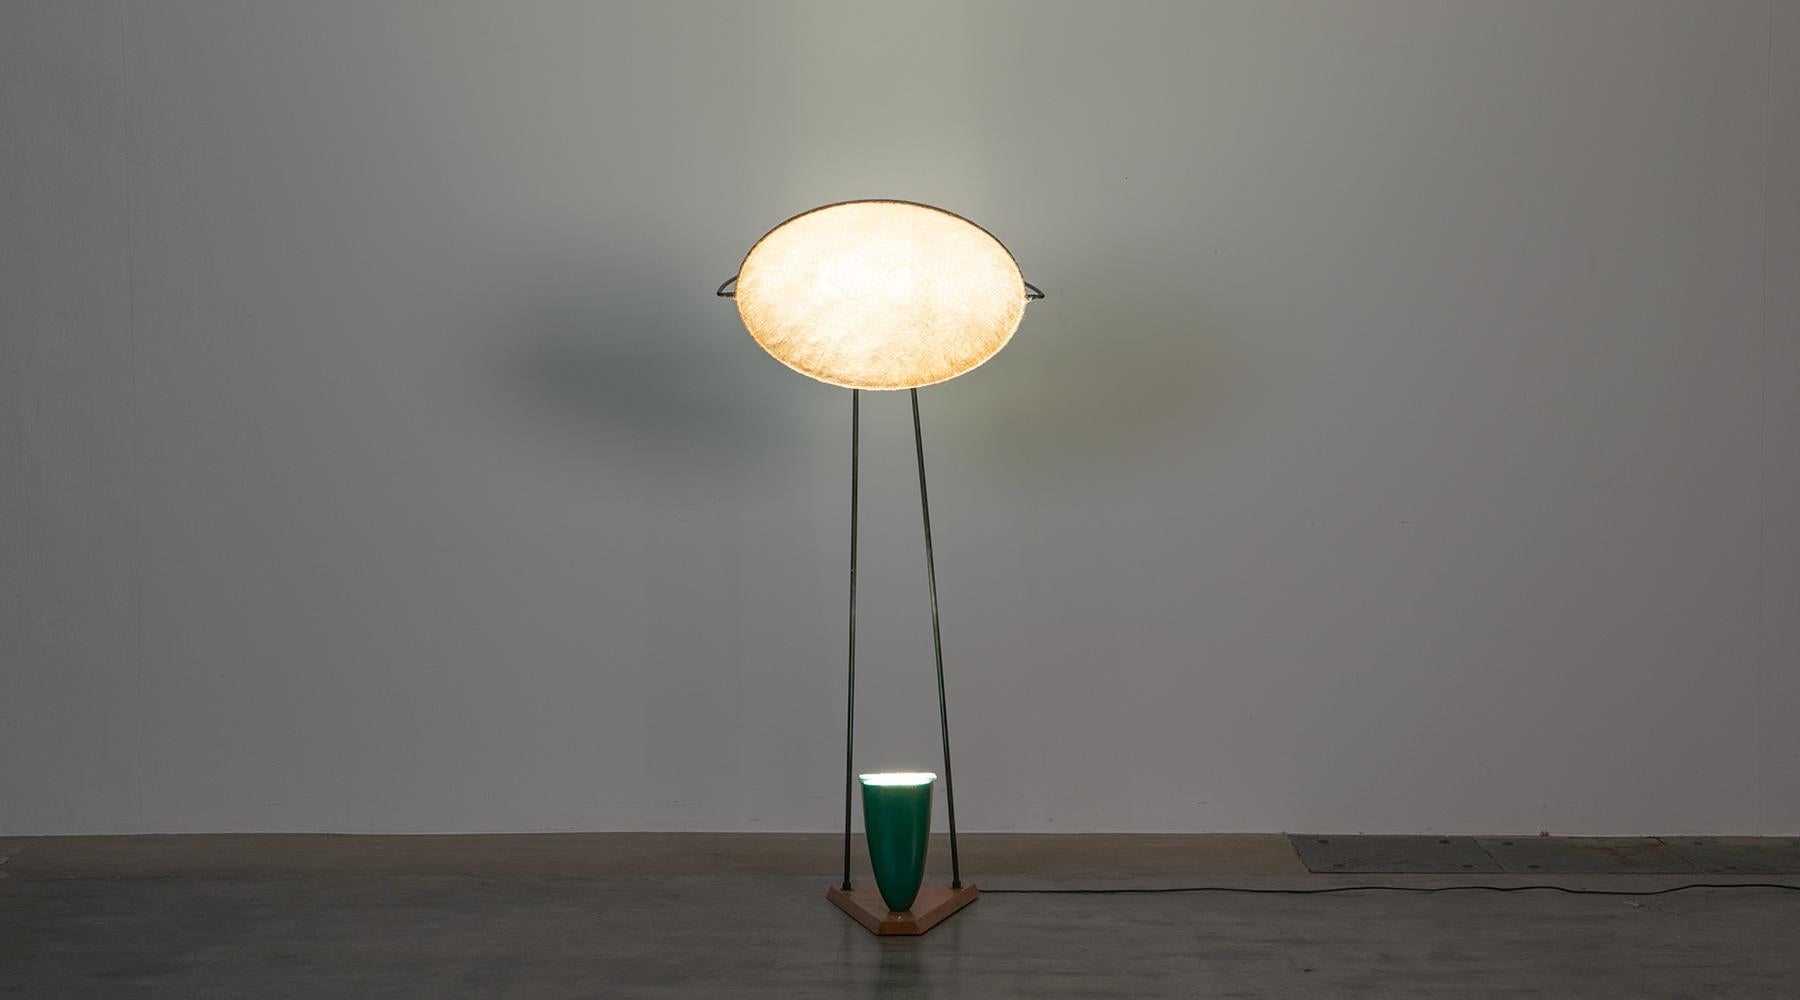 Floor lamp, ceramic shade and fiberglass diffuser by Mitchel Bobrick, USA, 1950.

A marvellous example of 1950s modernism by US-designer Mitchell Bobrick. The lamps exceptional elements produce a sculptural character, making it typical for